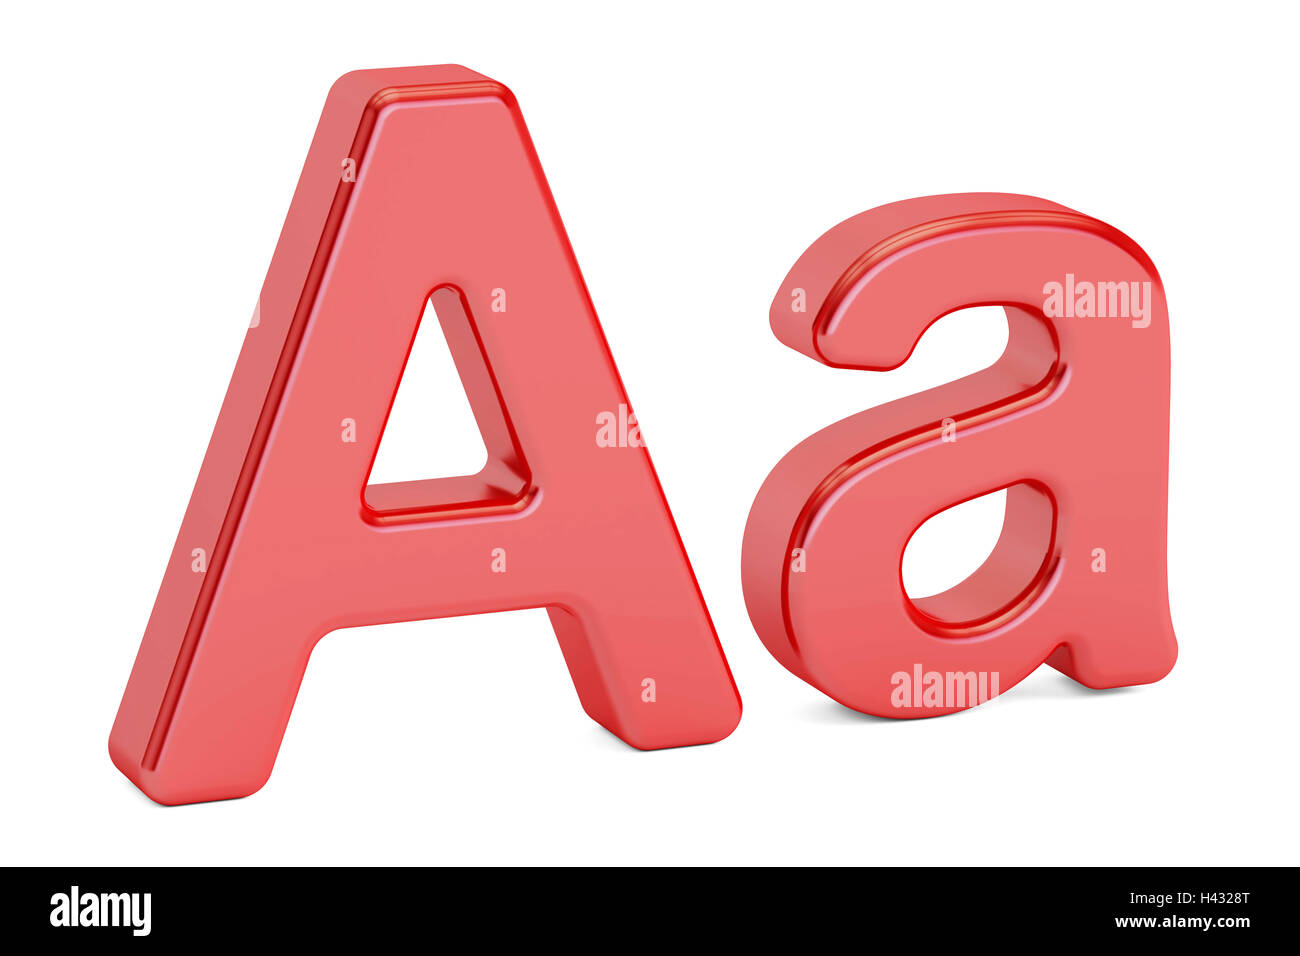 English letter A, 3D rendering isolated on white background Stock Photo